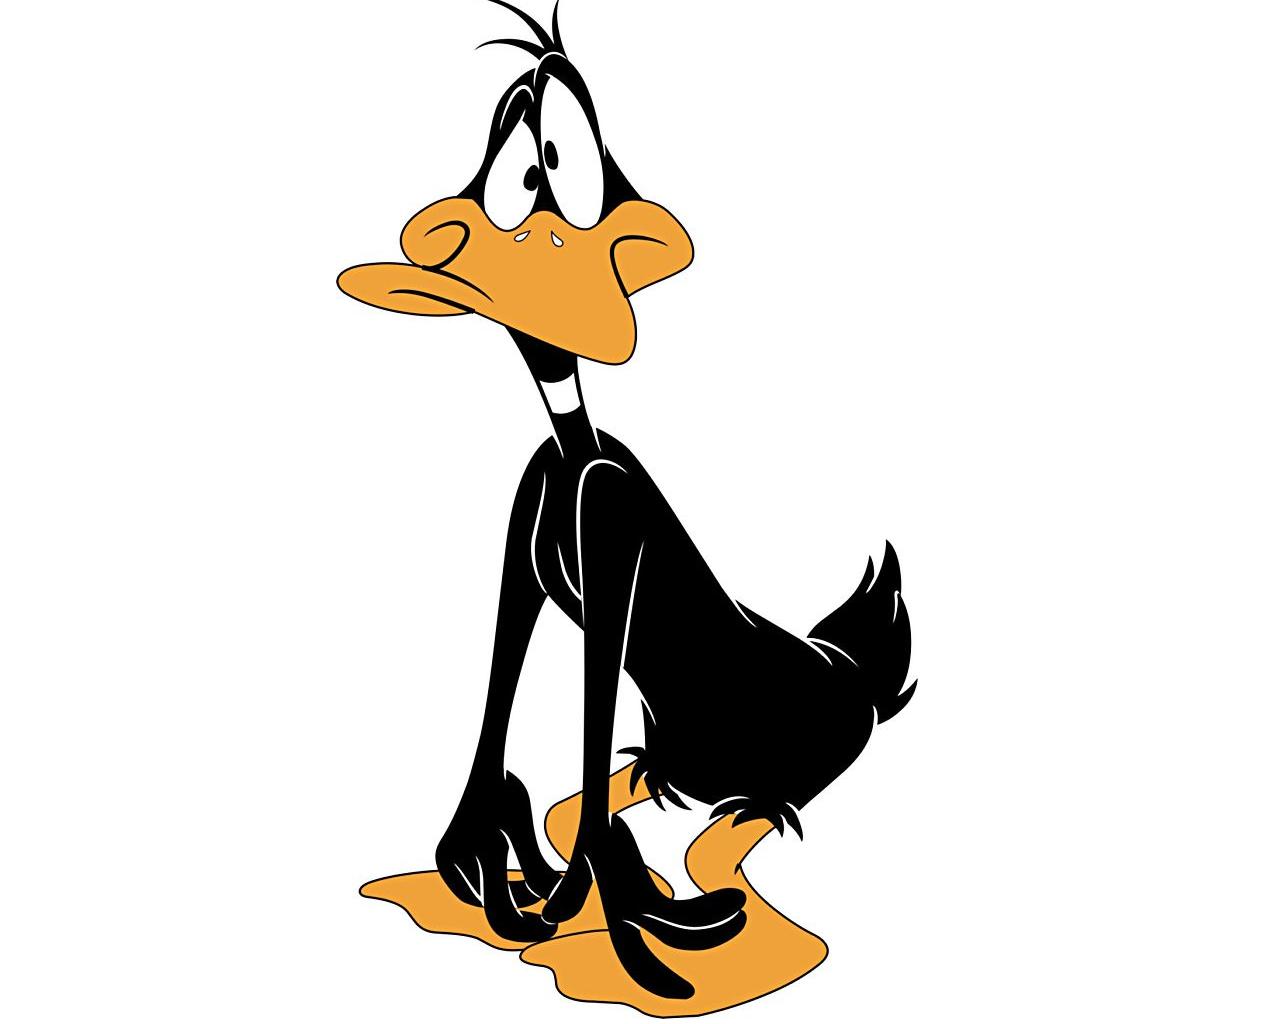 Daffy Duck Wallpapers | HD Wallpapers Base